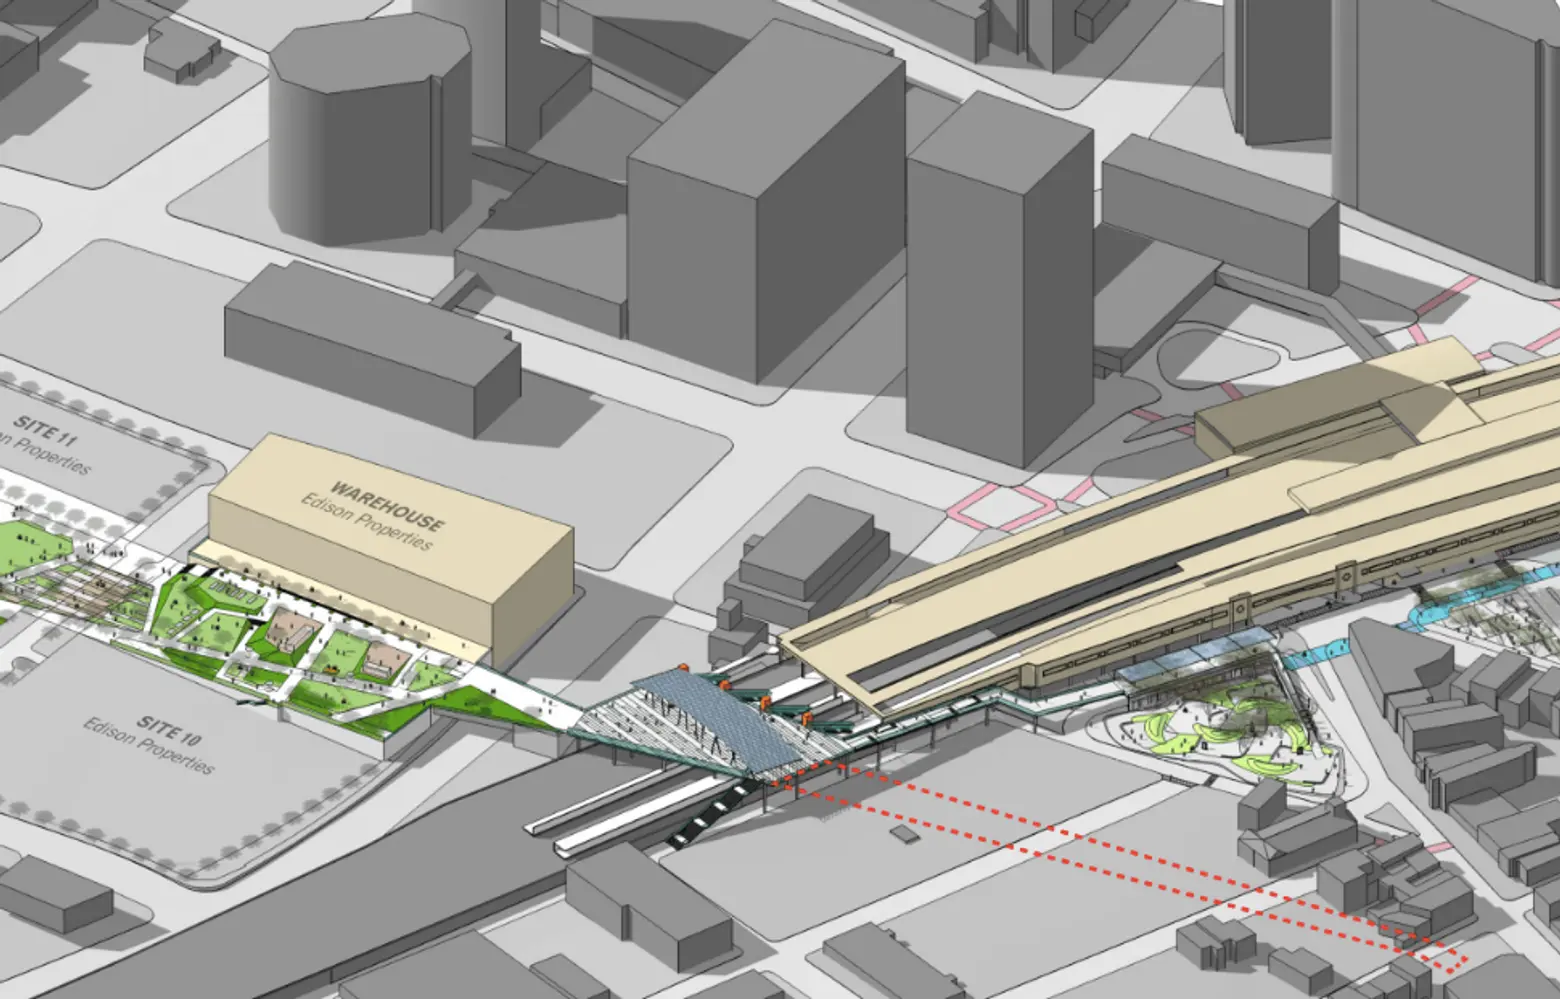 A High Line-esque bridge and park are coming to Newark, New Jersey